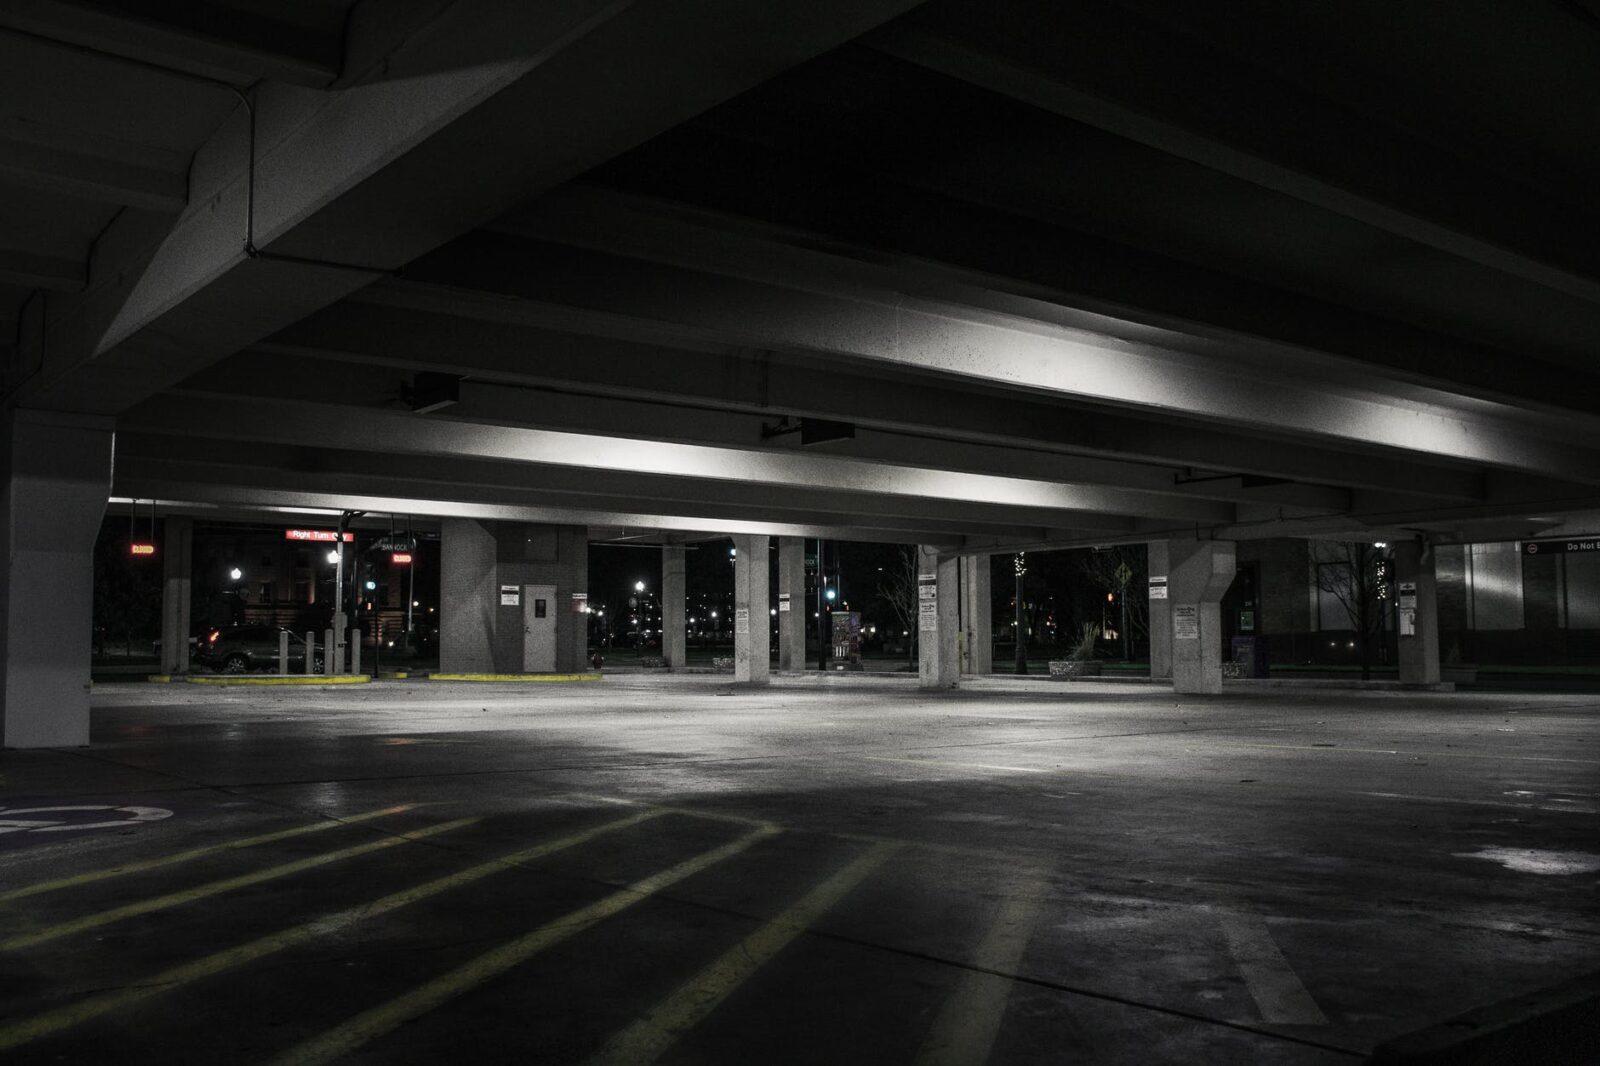 Data-driven parking to save time and energy